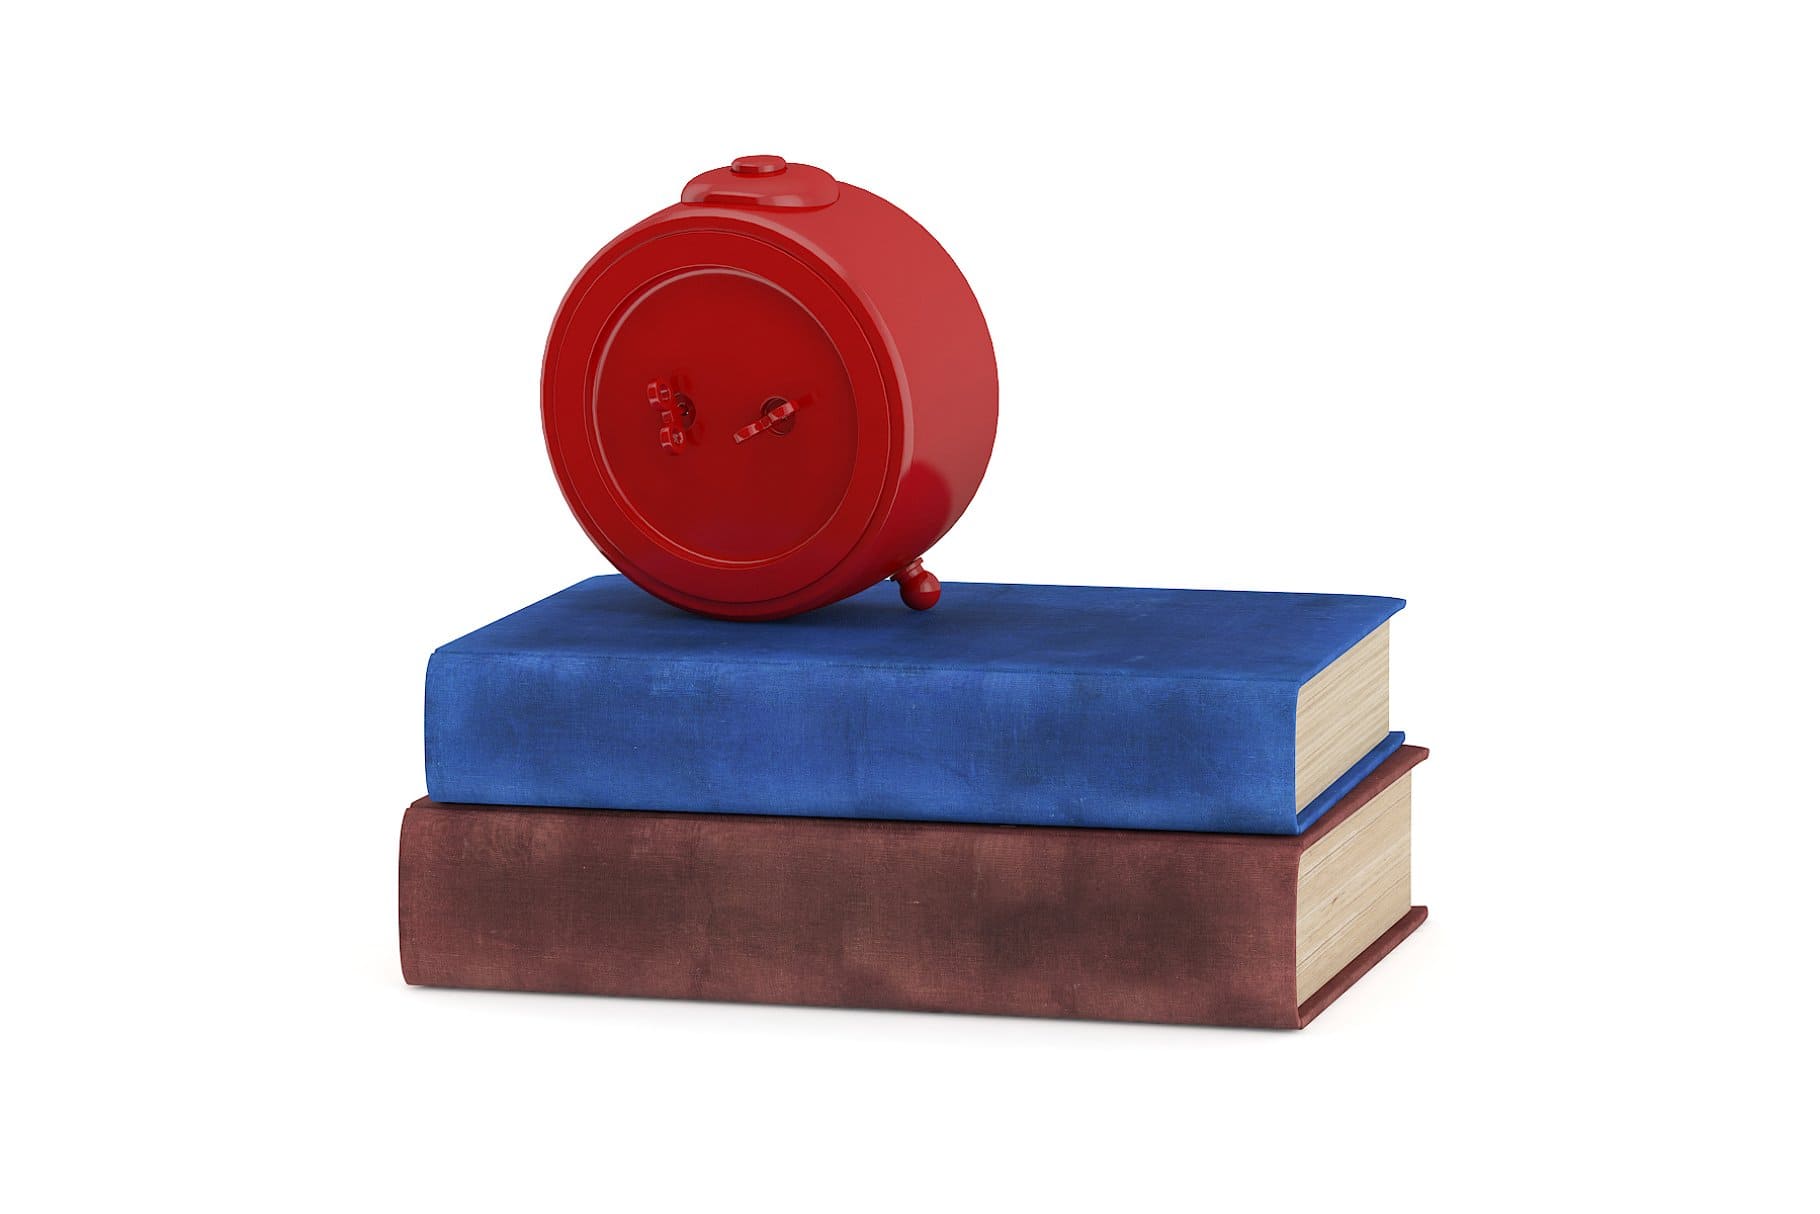 3D model of a clock and two books in the form of a drawing.